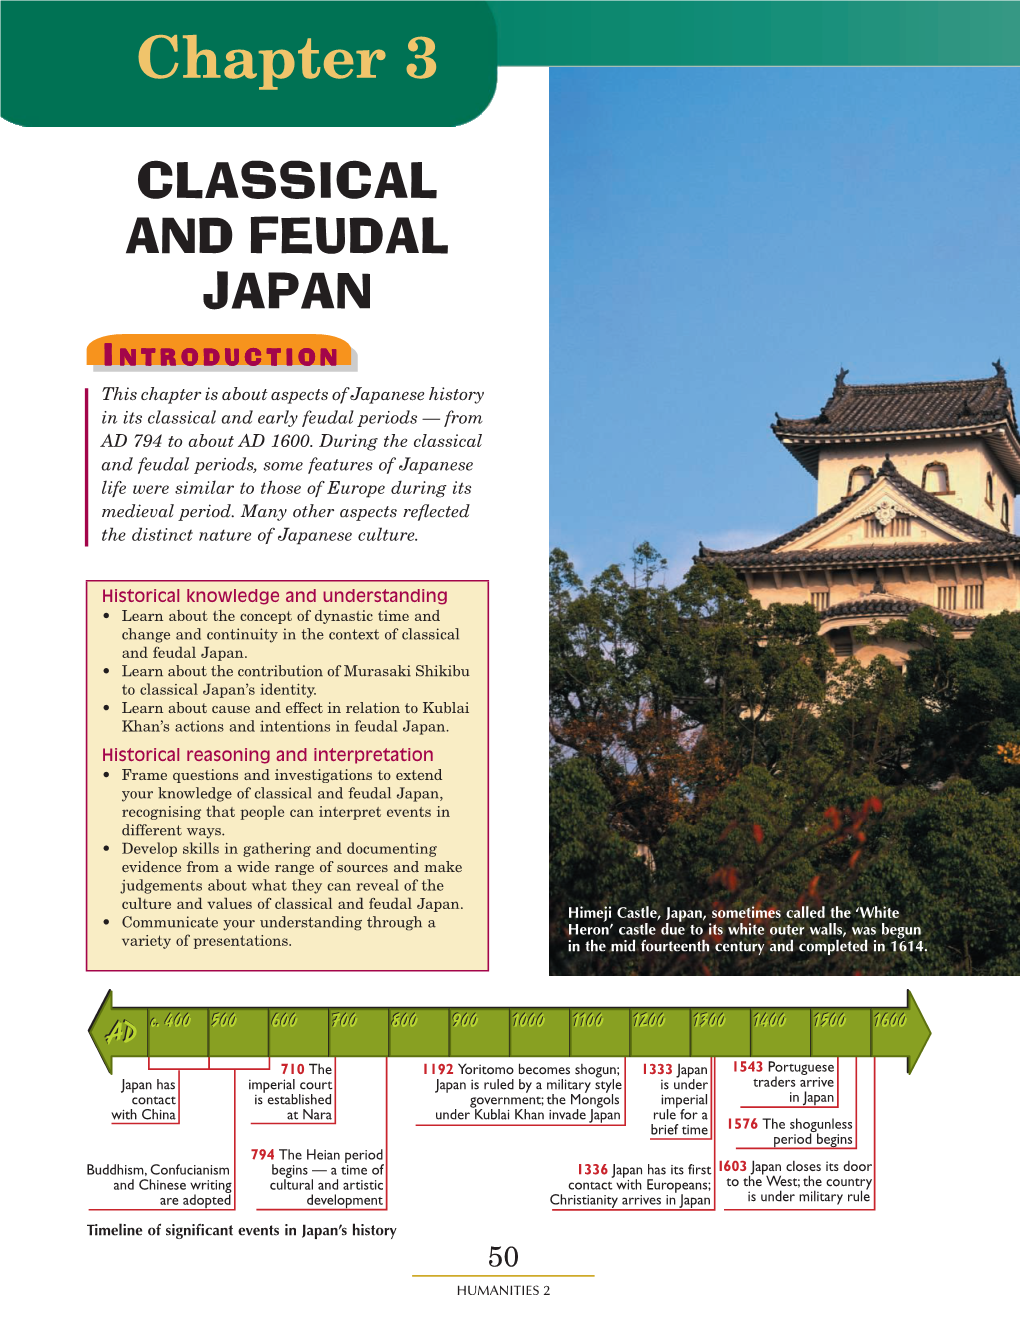 Classical and Feudal Japan